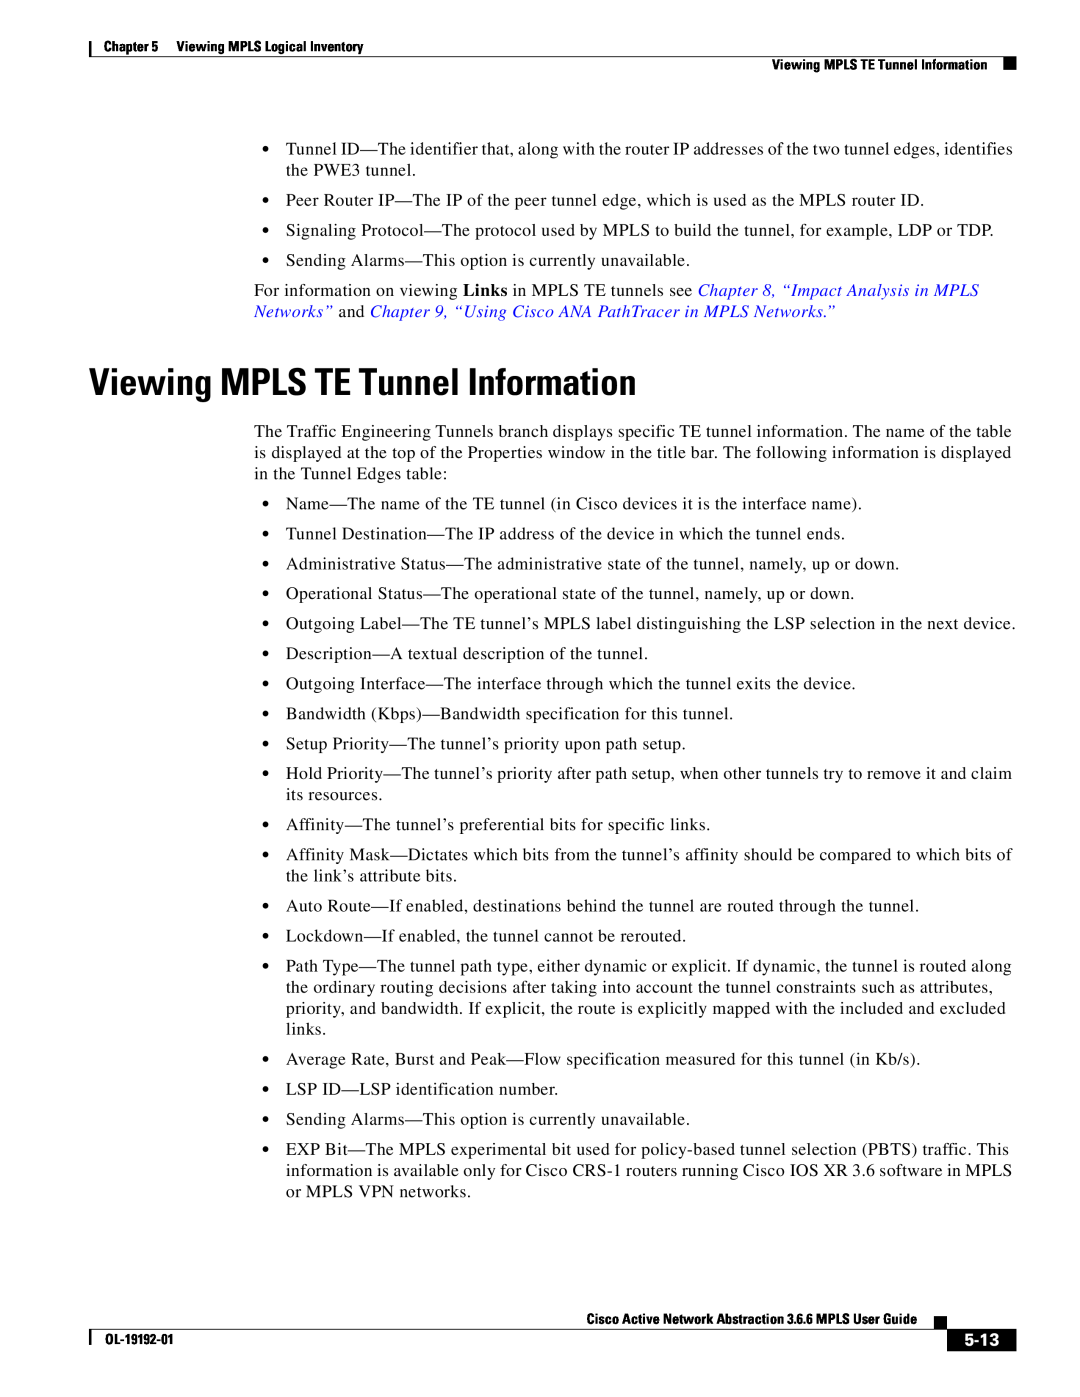 Cisco Systems 3.6.6 manual Viewing MPLS TE Tunnel Information, 5-13 